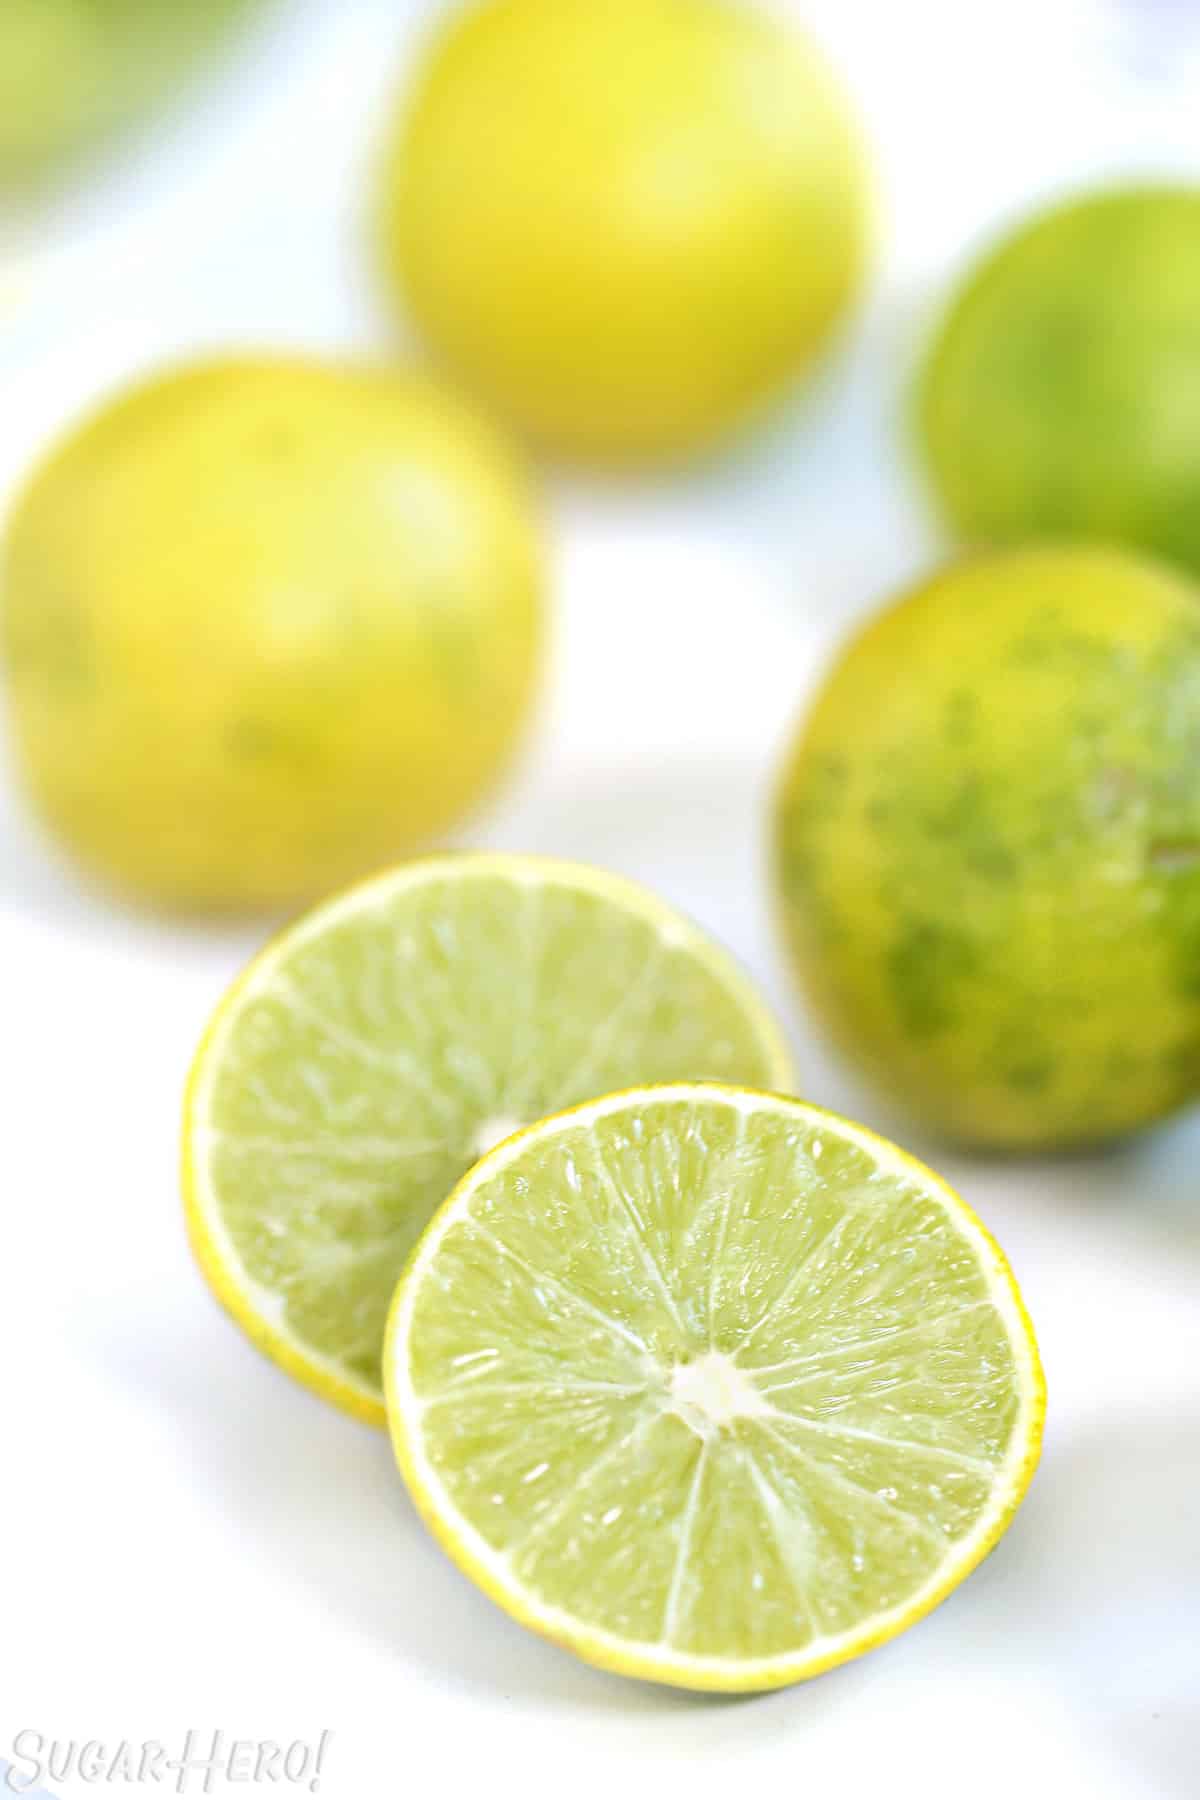 A key lime cut in half on a white background, with whole key limes behind the halves.